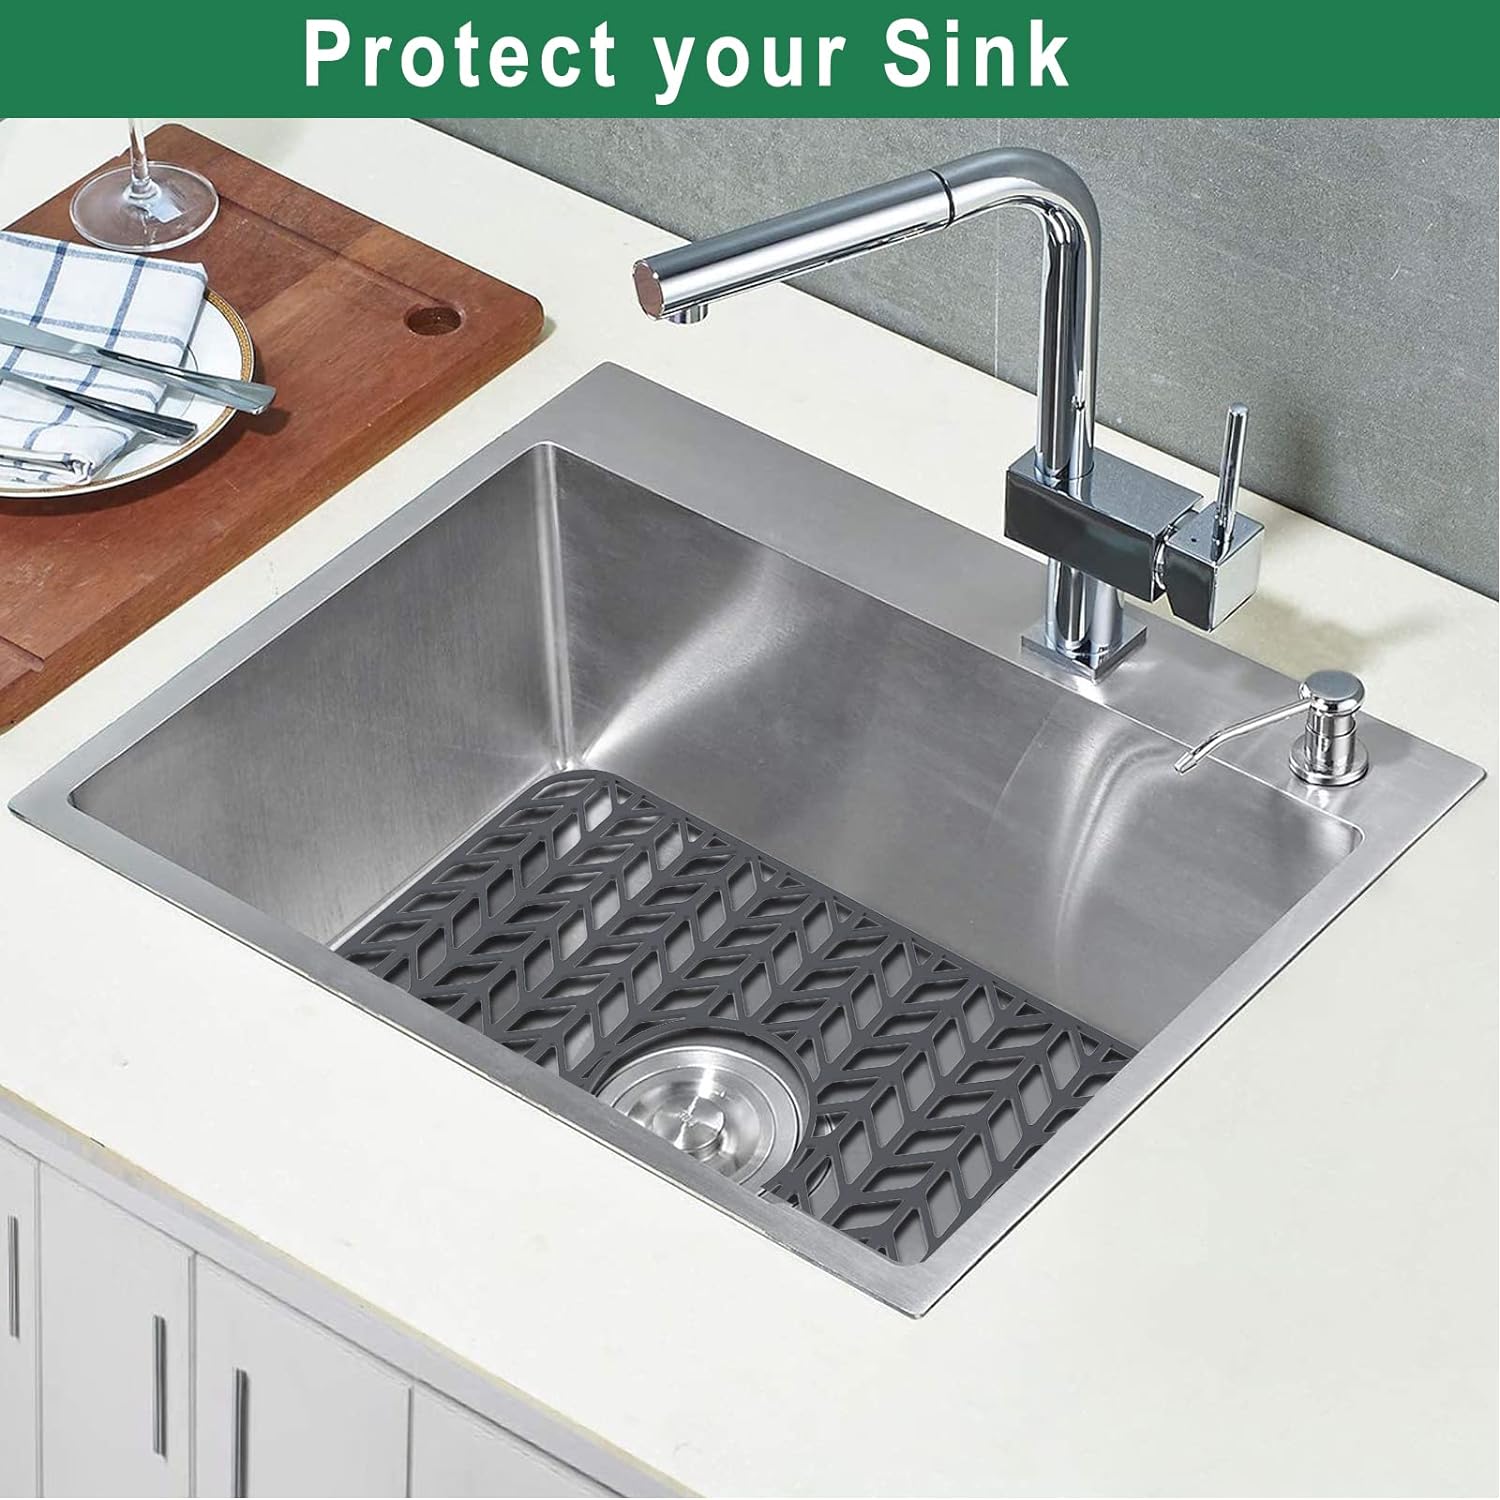 GUUKIN Sink Protectors for Kitchen, 18 3/16''x 12 1/2'' Silicone